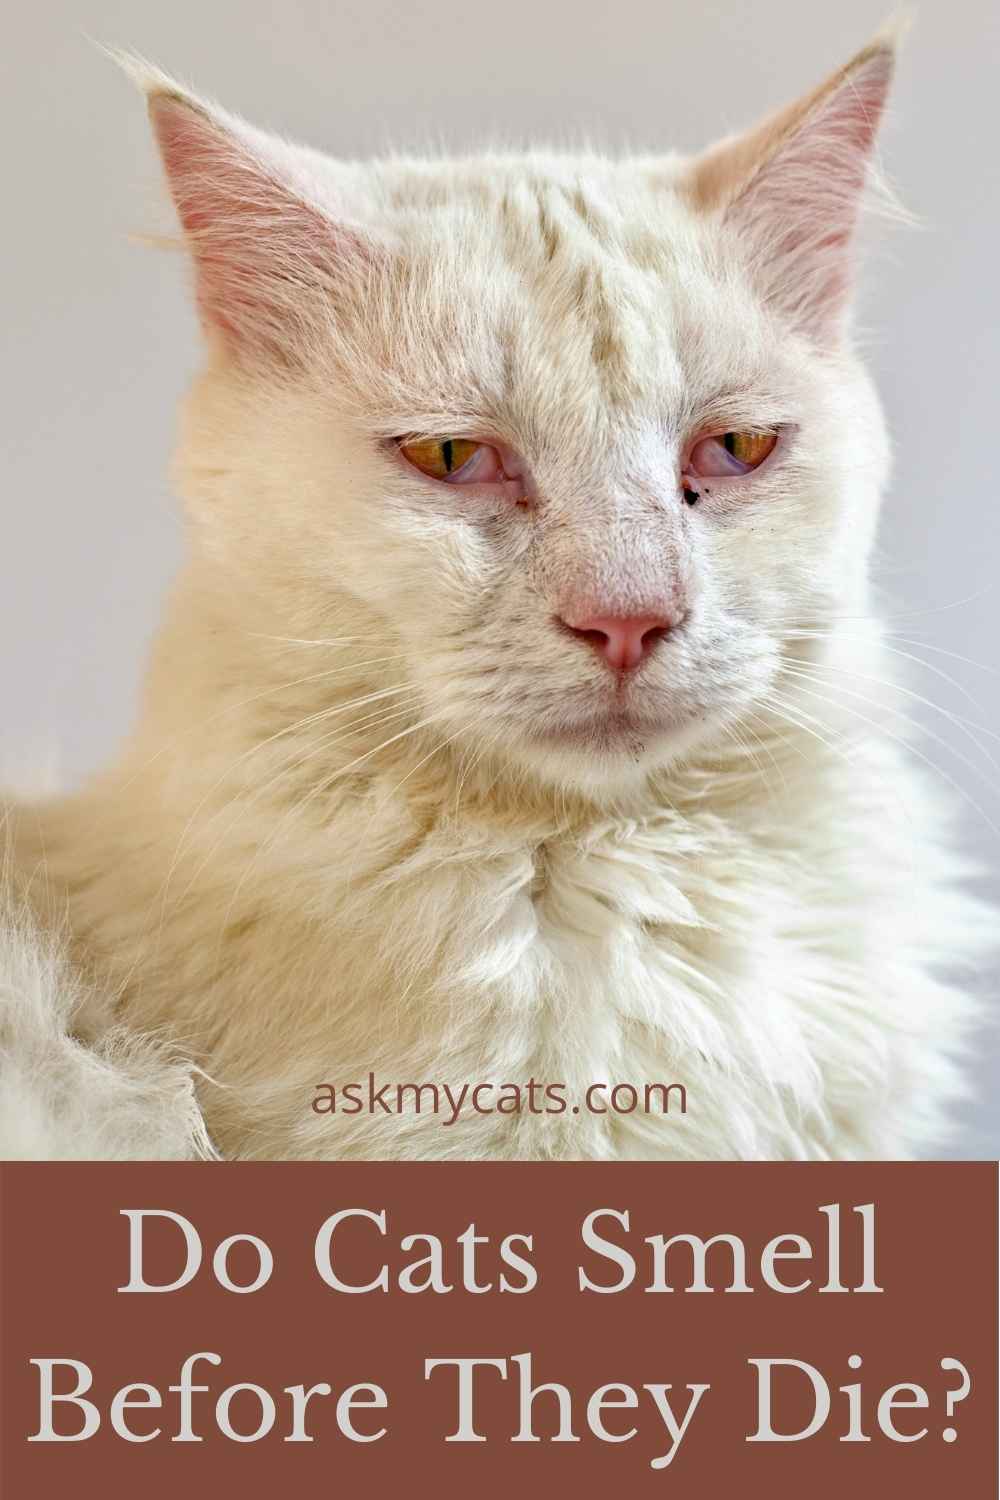 My Cat Smells Like Death! Is He Actually Dying?